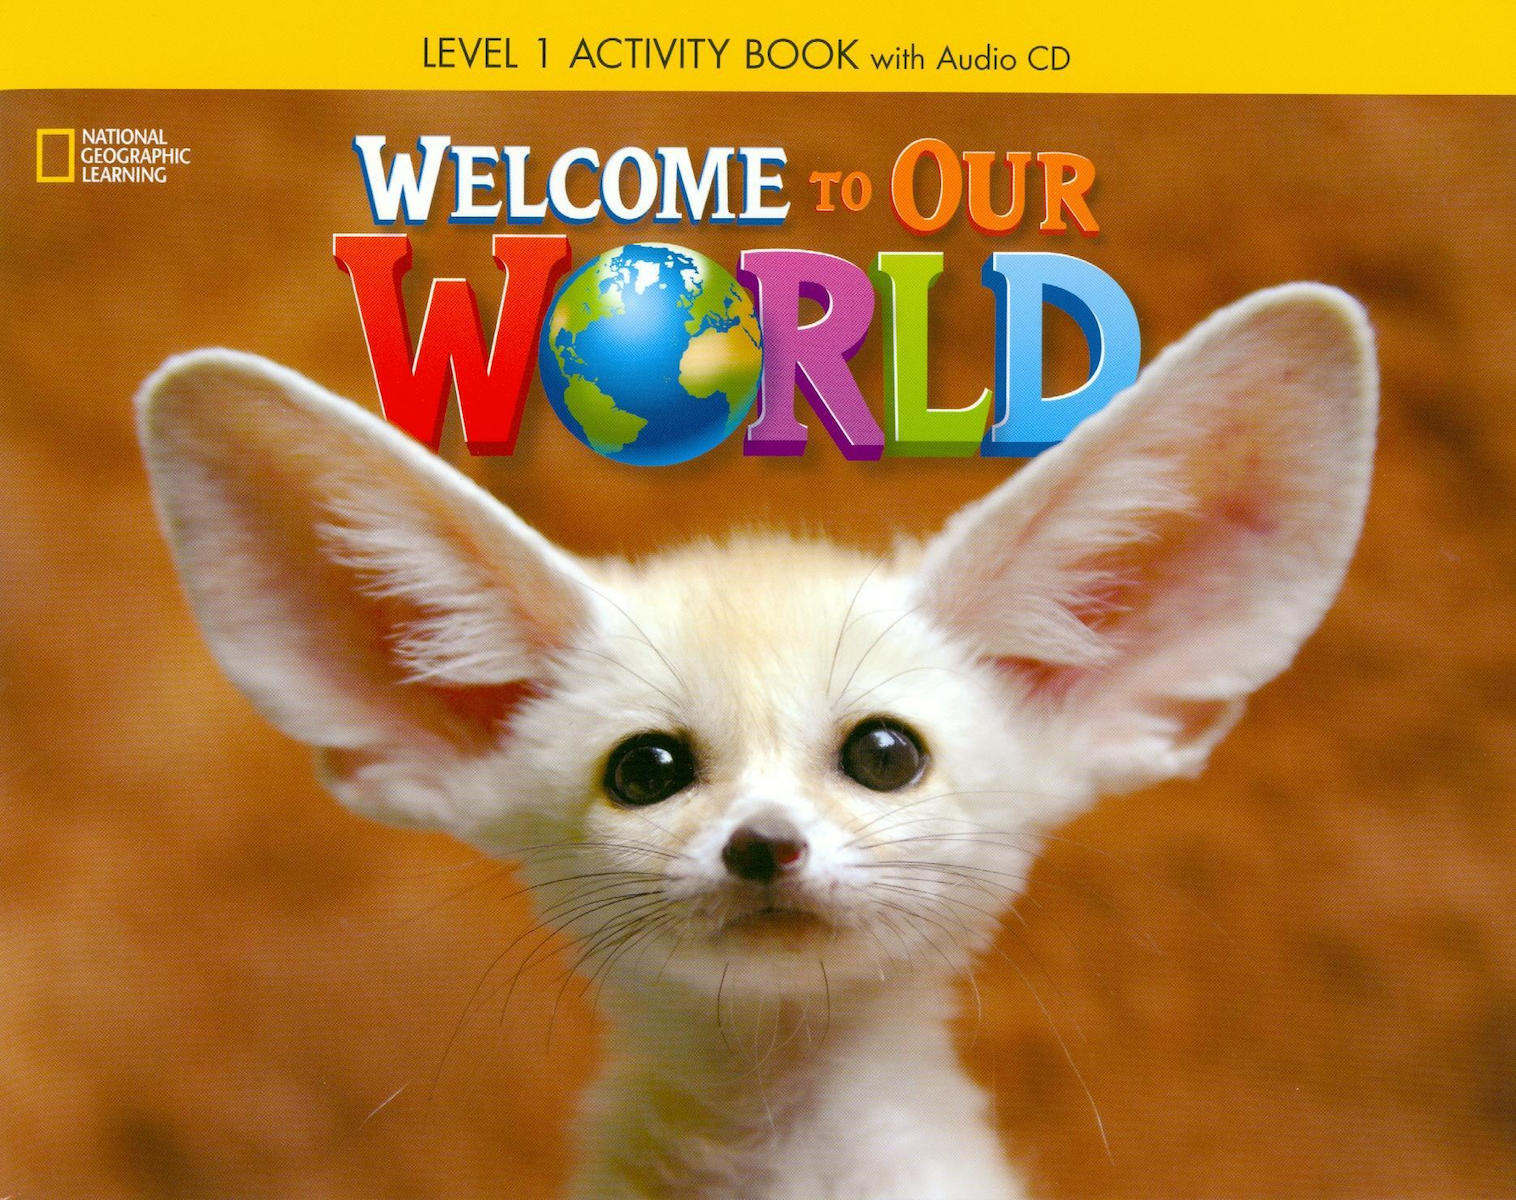 WELCOME TO OUR WORLD 1 Activity Book + Audio CD